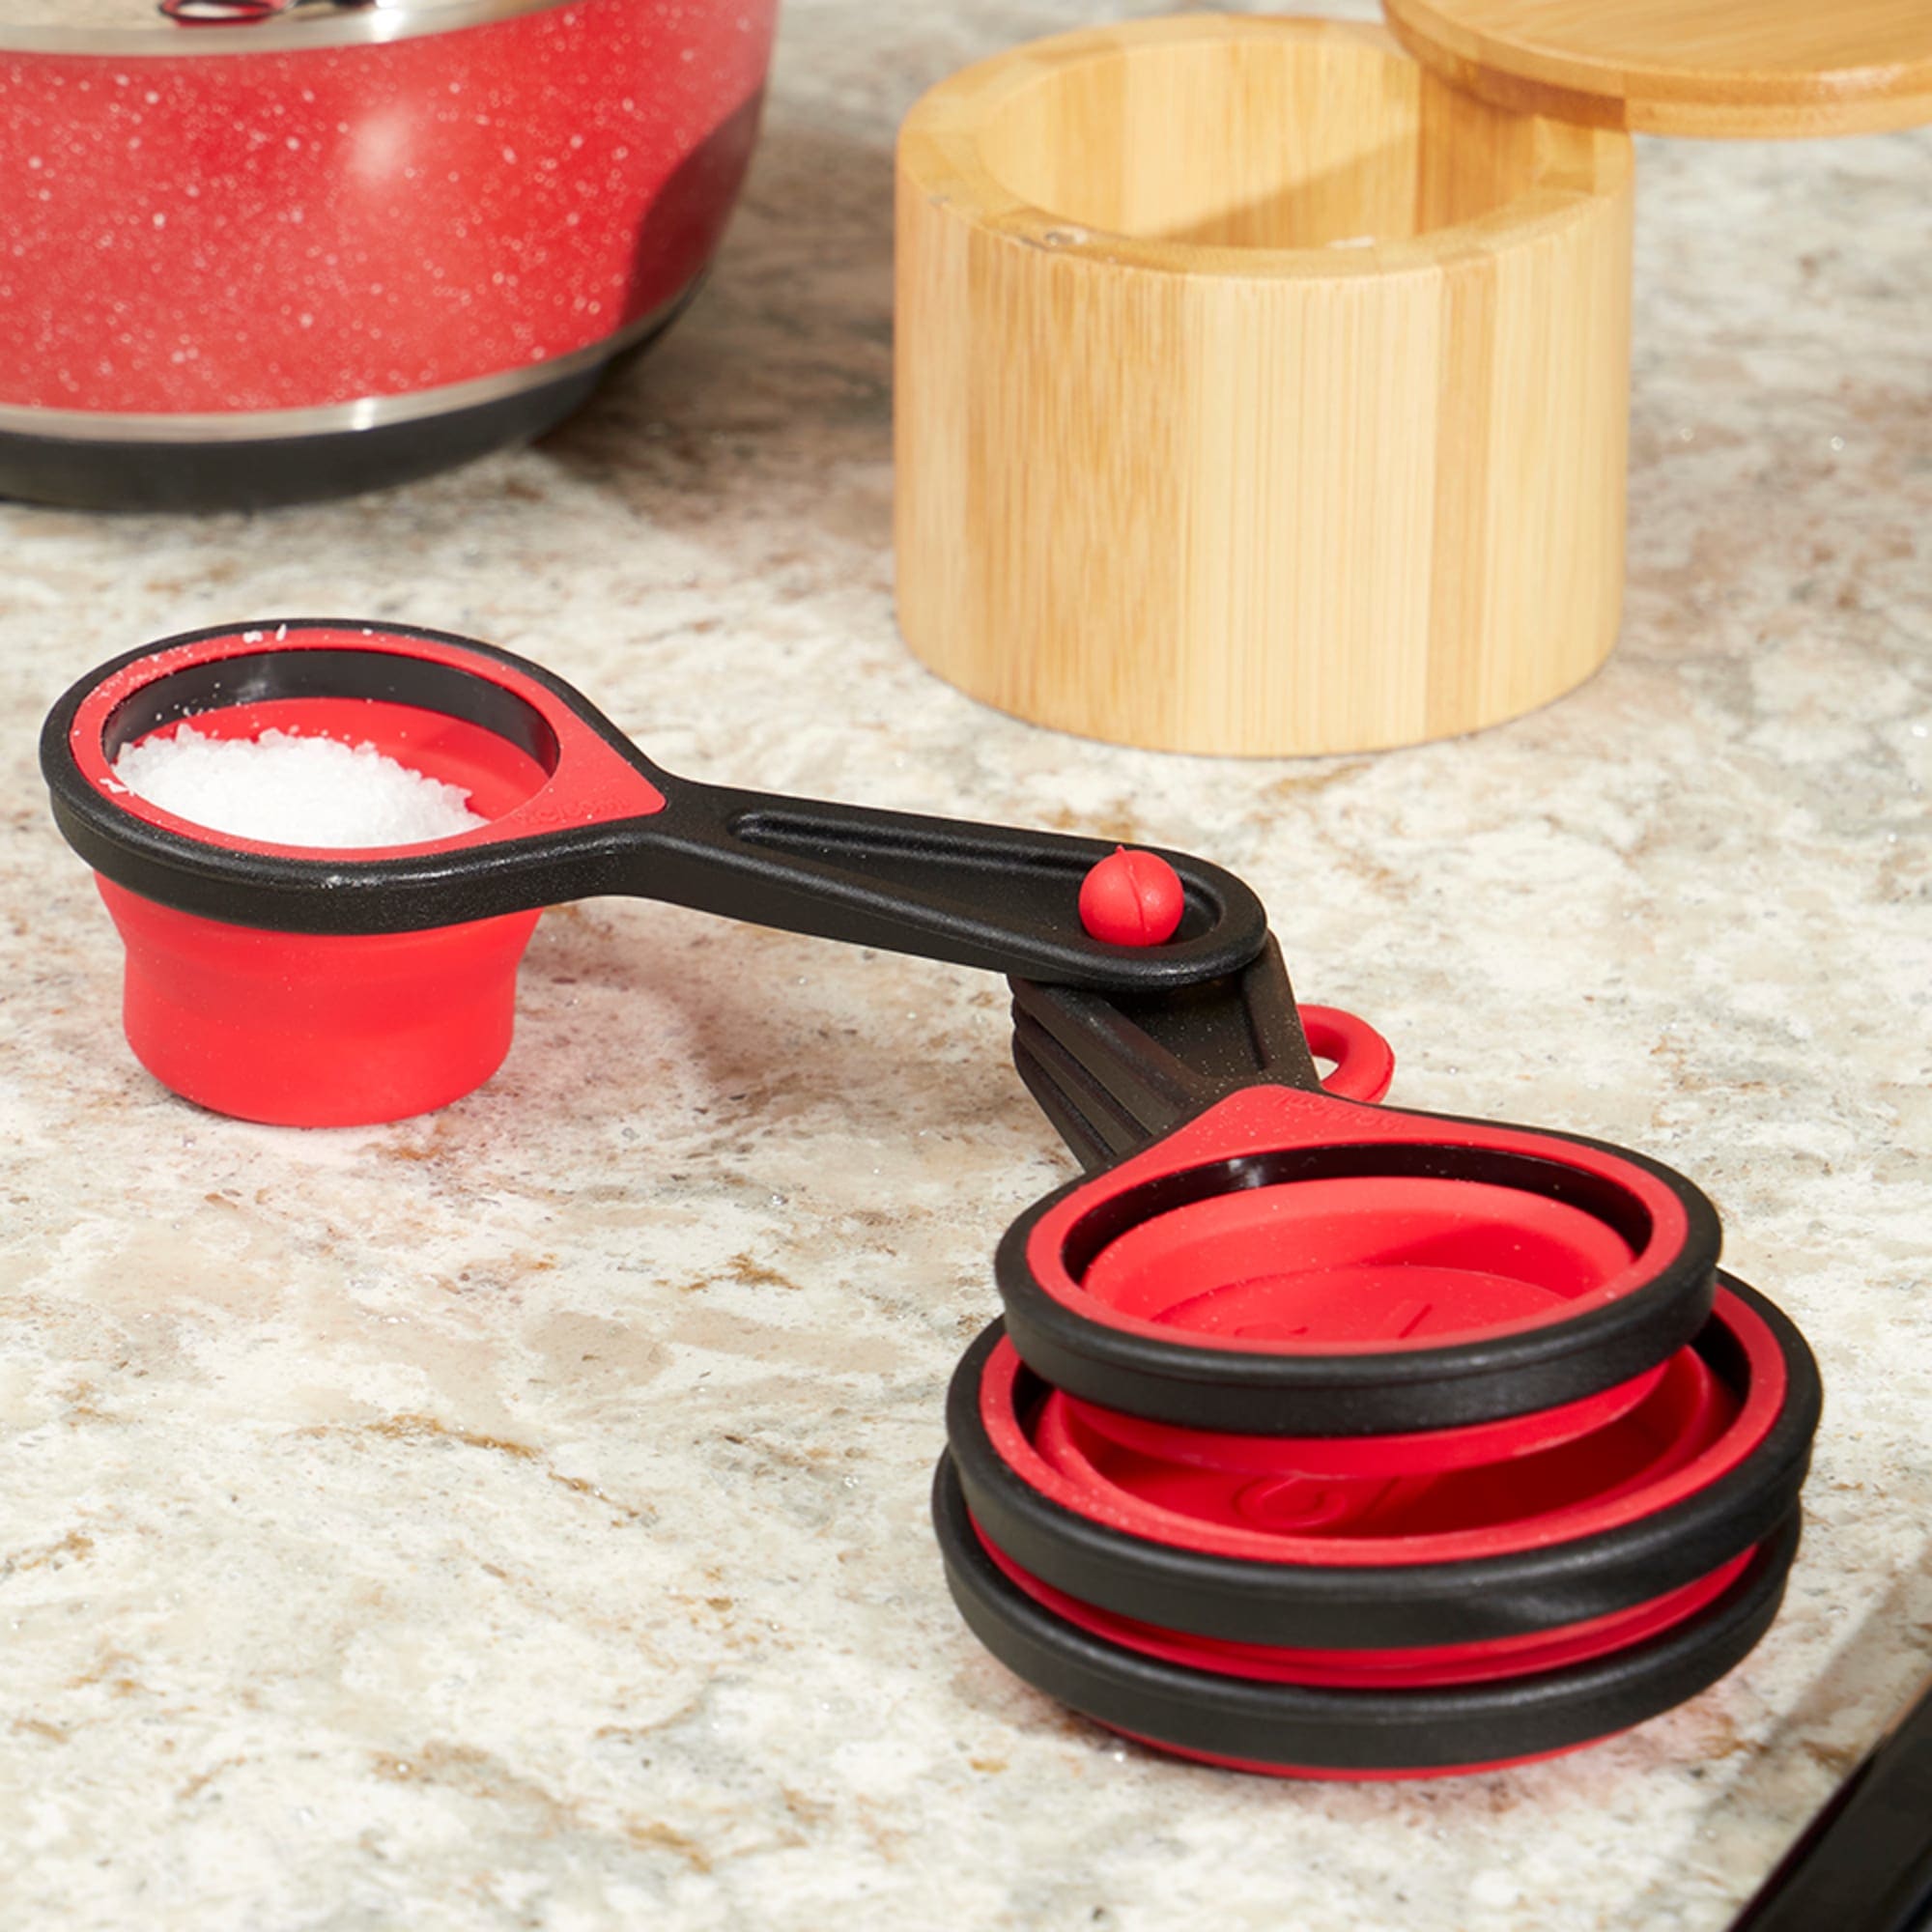 Home Basics 4 Piece Collapsible Measuring Cups $5.00 EACH, CASE PACK OF 24